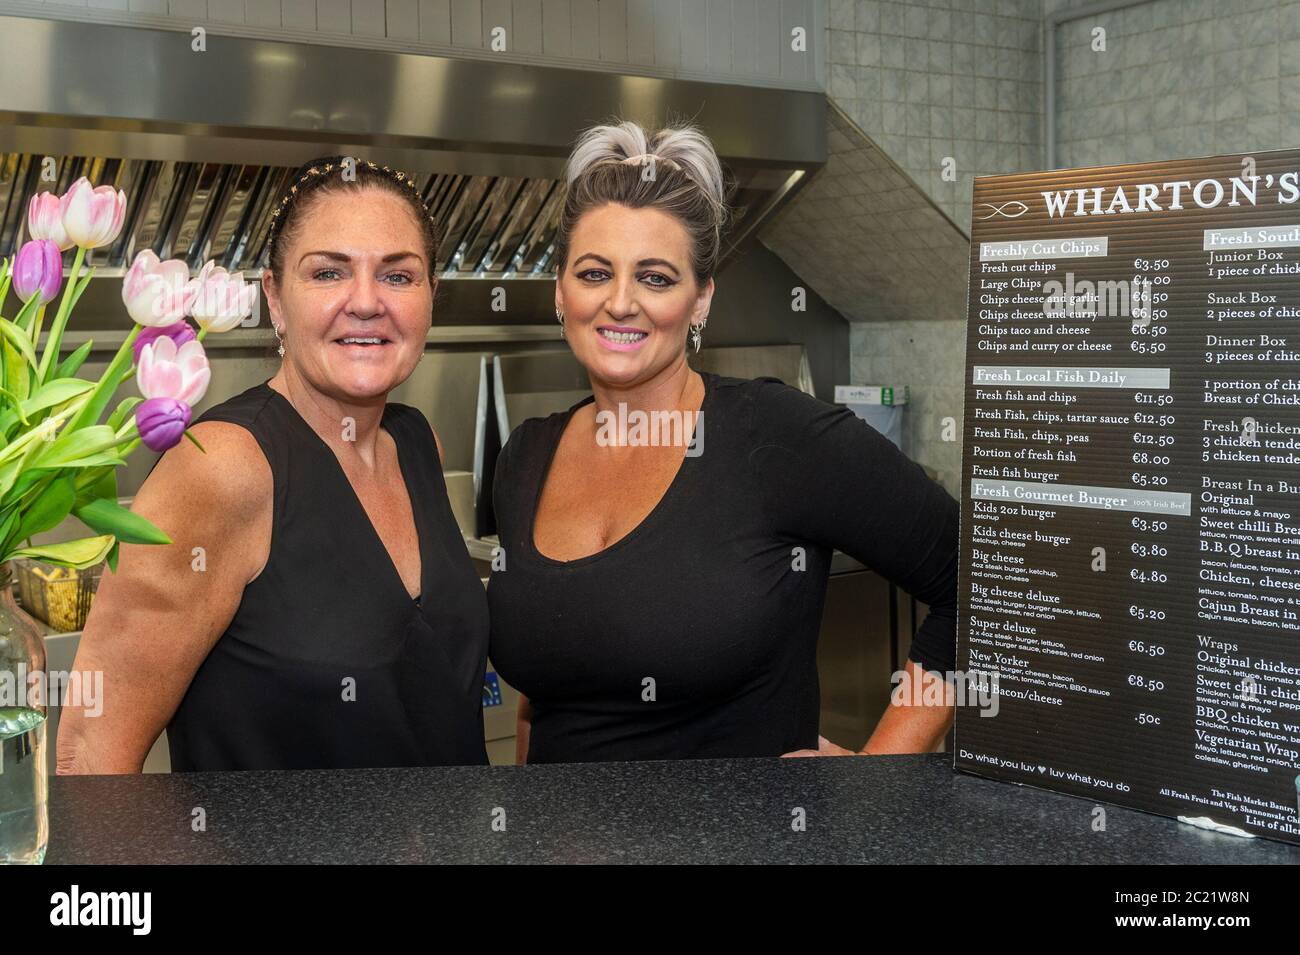 Bantry, West Cork, Ireland. 16th June, 2020. The very popular Wharton's Fish and Chip Shop reopened recently after a 13 week closure due to the Covid-19 pandemic. Sisters and owners, Mary and Catherine Wharton, said the locals have been very supportive since the chip shop has reopened. Credit: AG News/Alamy Live News Stock Photo